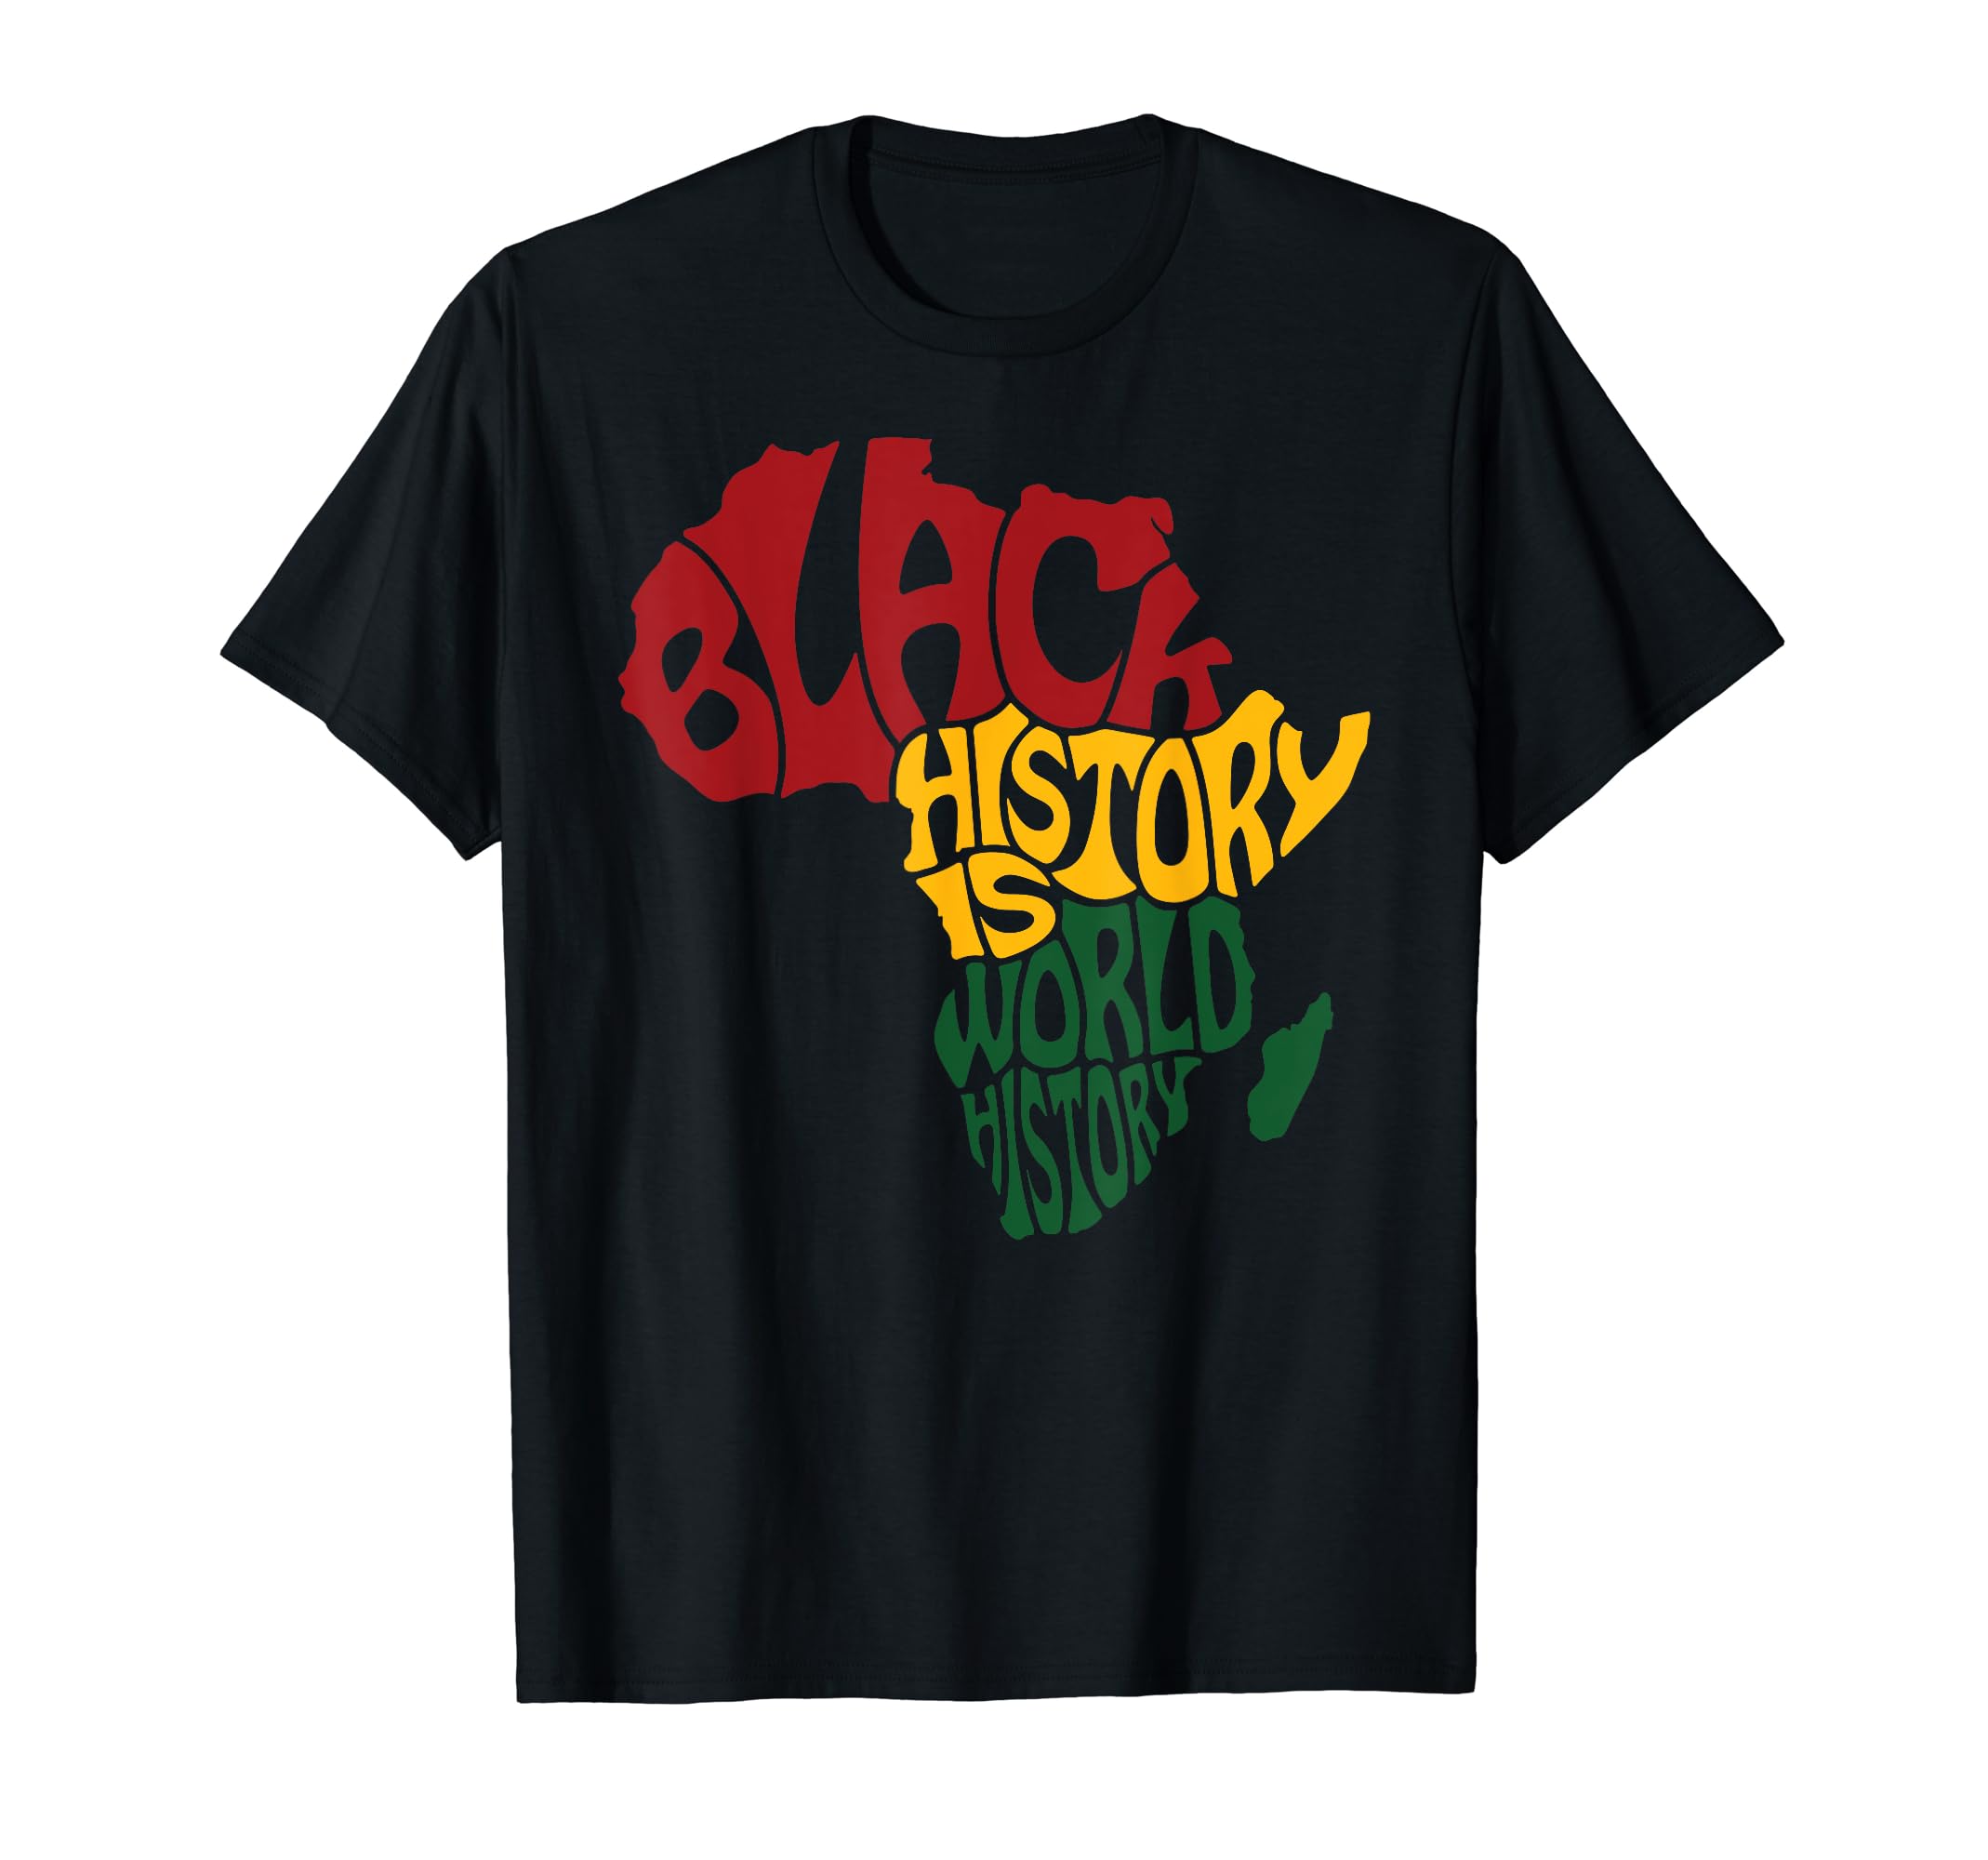 I AM BLACK HISTORY African American Pride History Gift T-Shirt